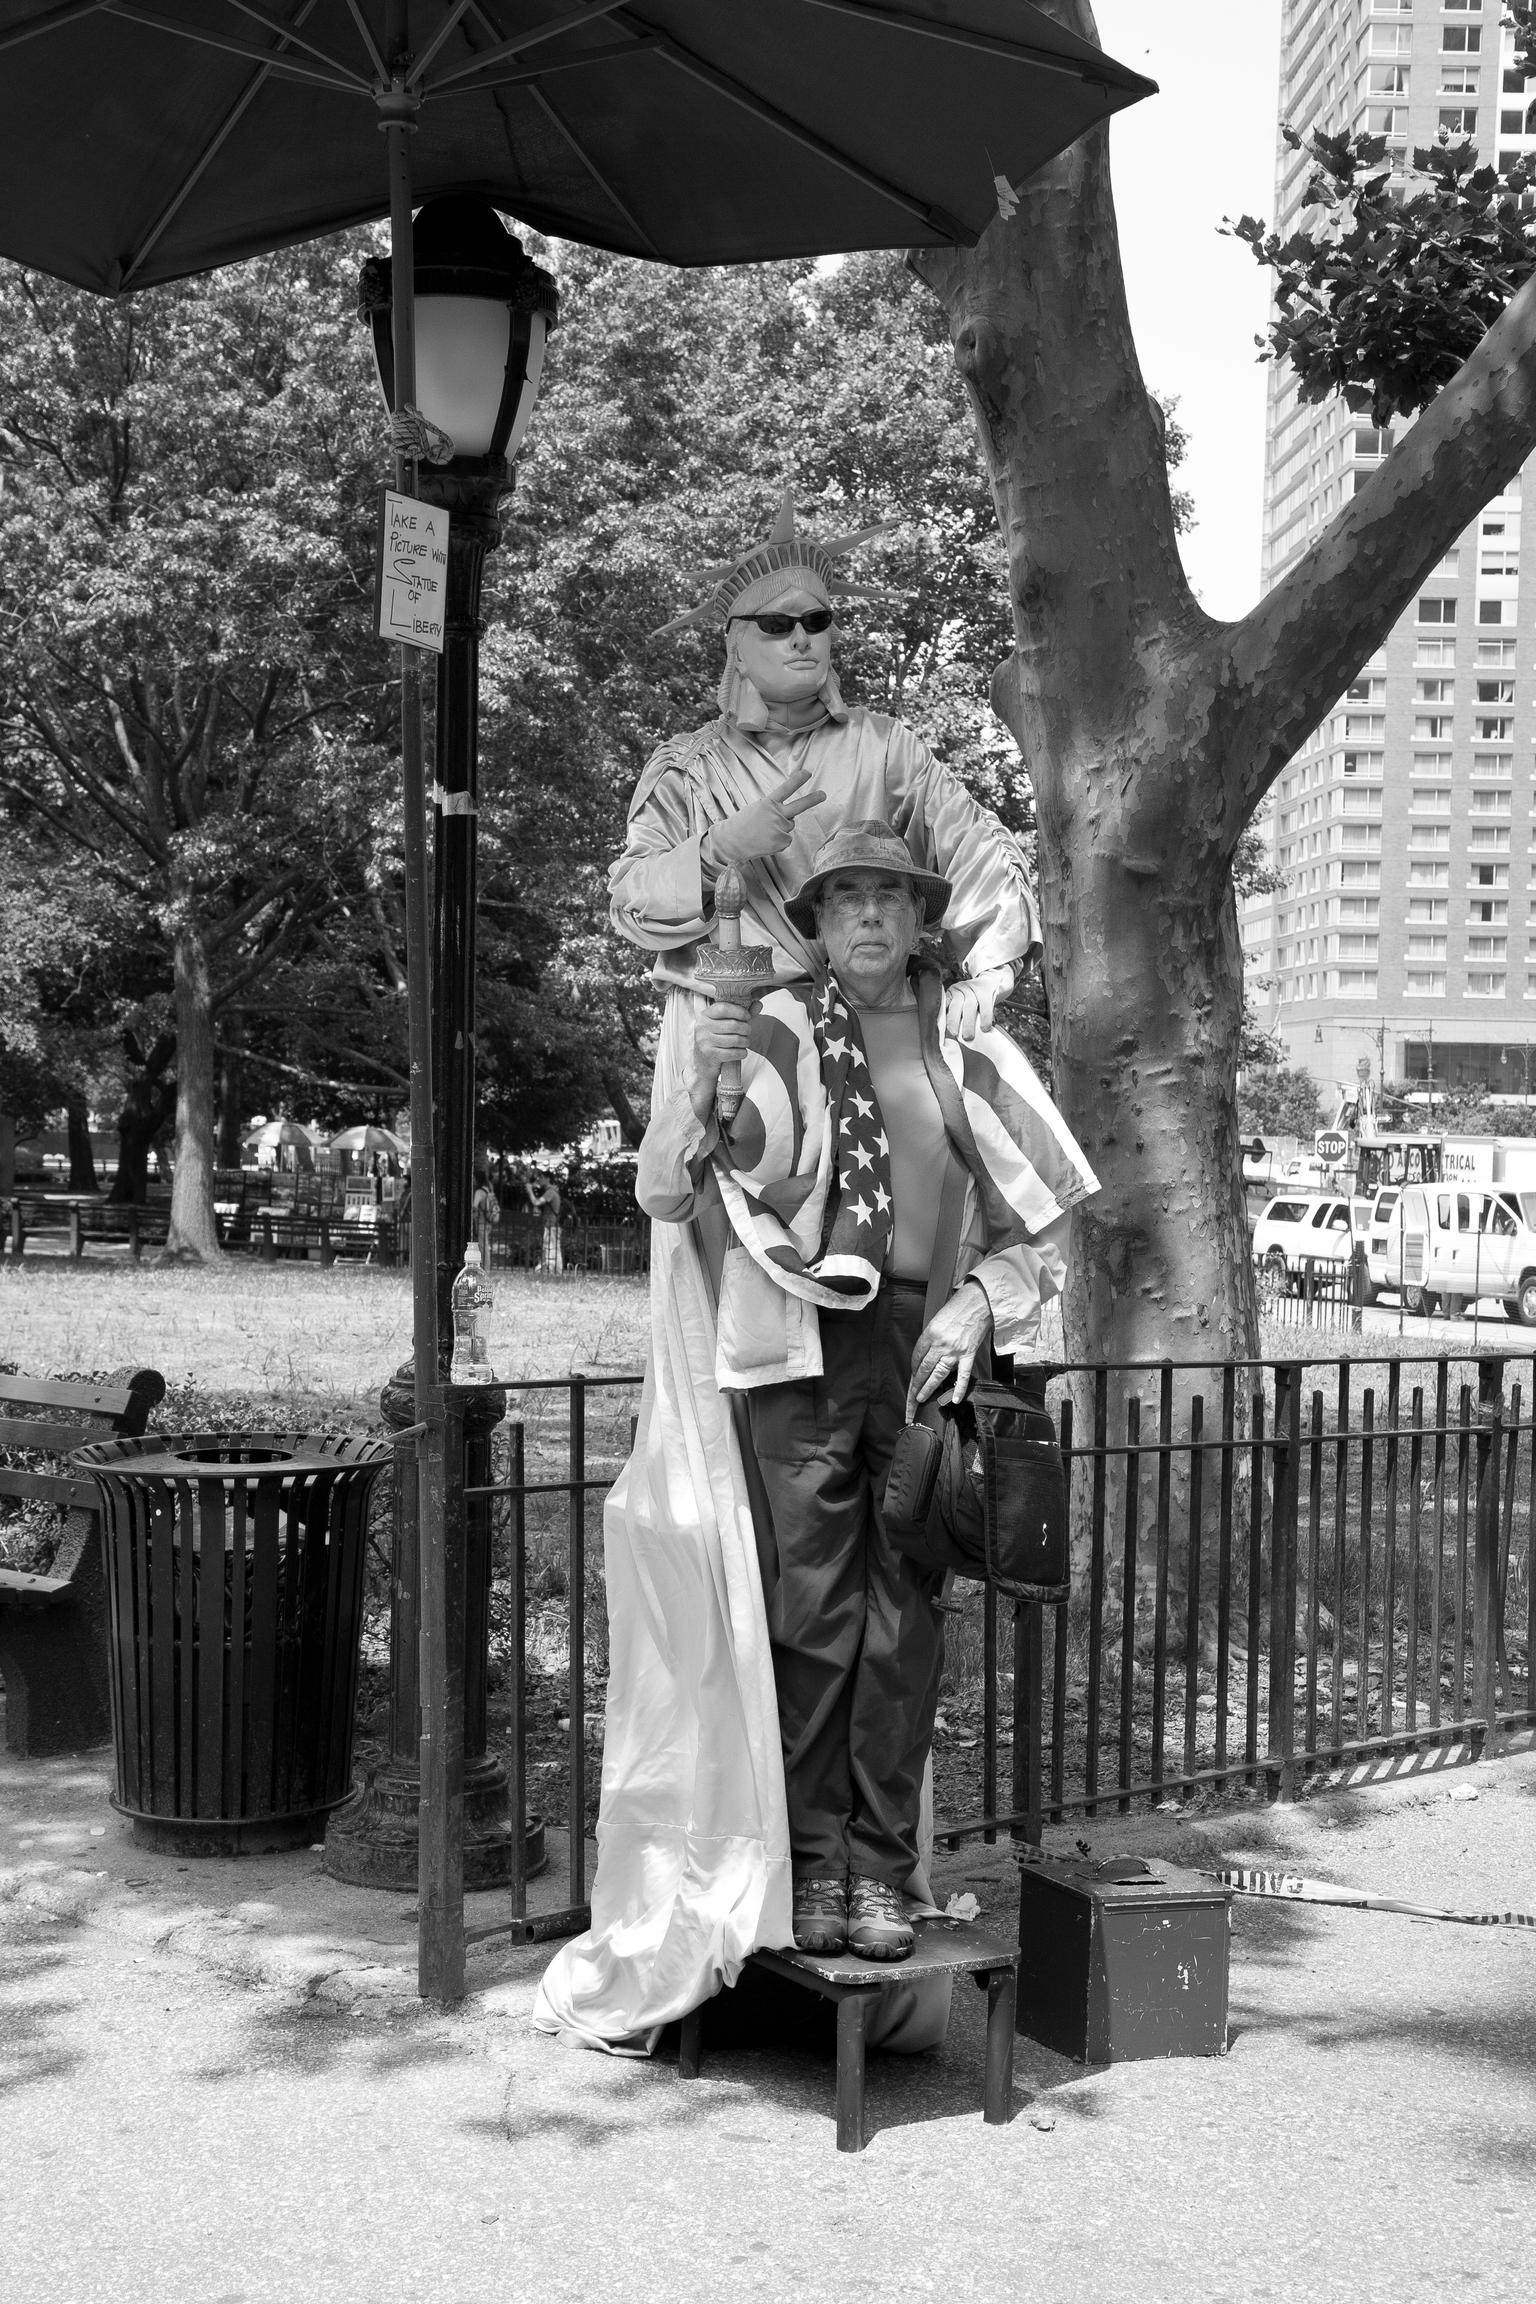 Battery Park. Photographer David Hurn and the Statue of Liberty. A tourist through and through. New York USA